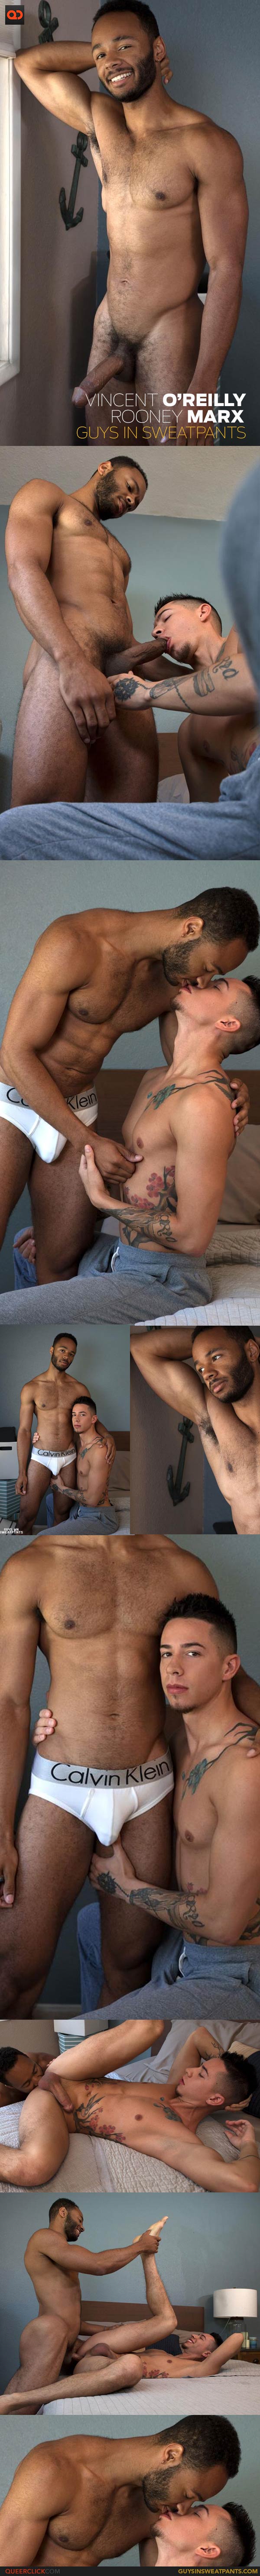 Guys in Sweatpants: Rooney Marx and Vincent O’Reilly - Use my Hole!